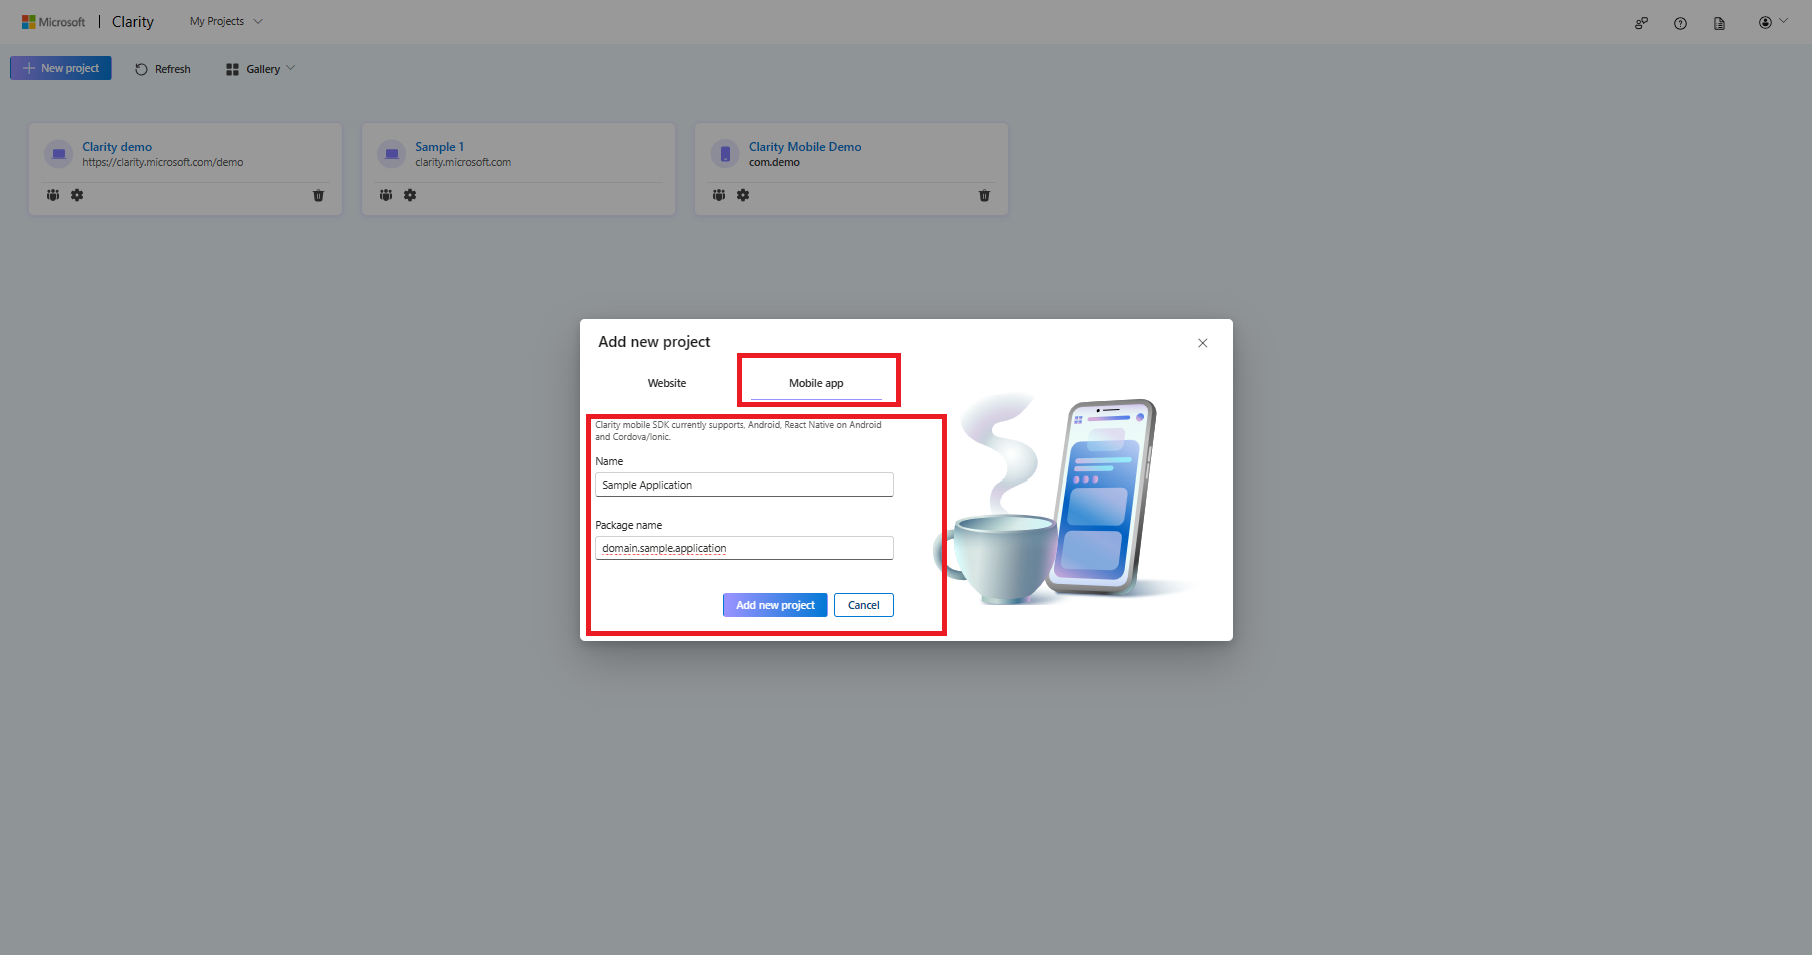 Add details and select create to add a mobile project.